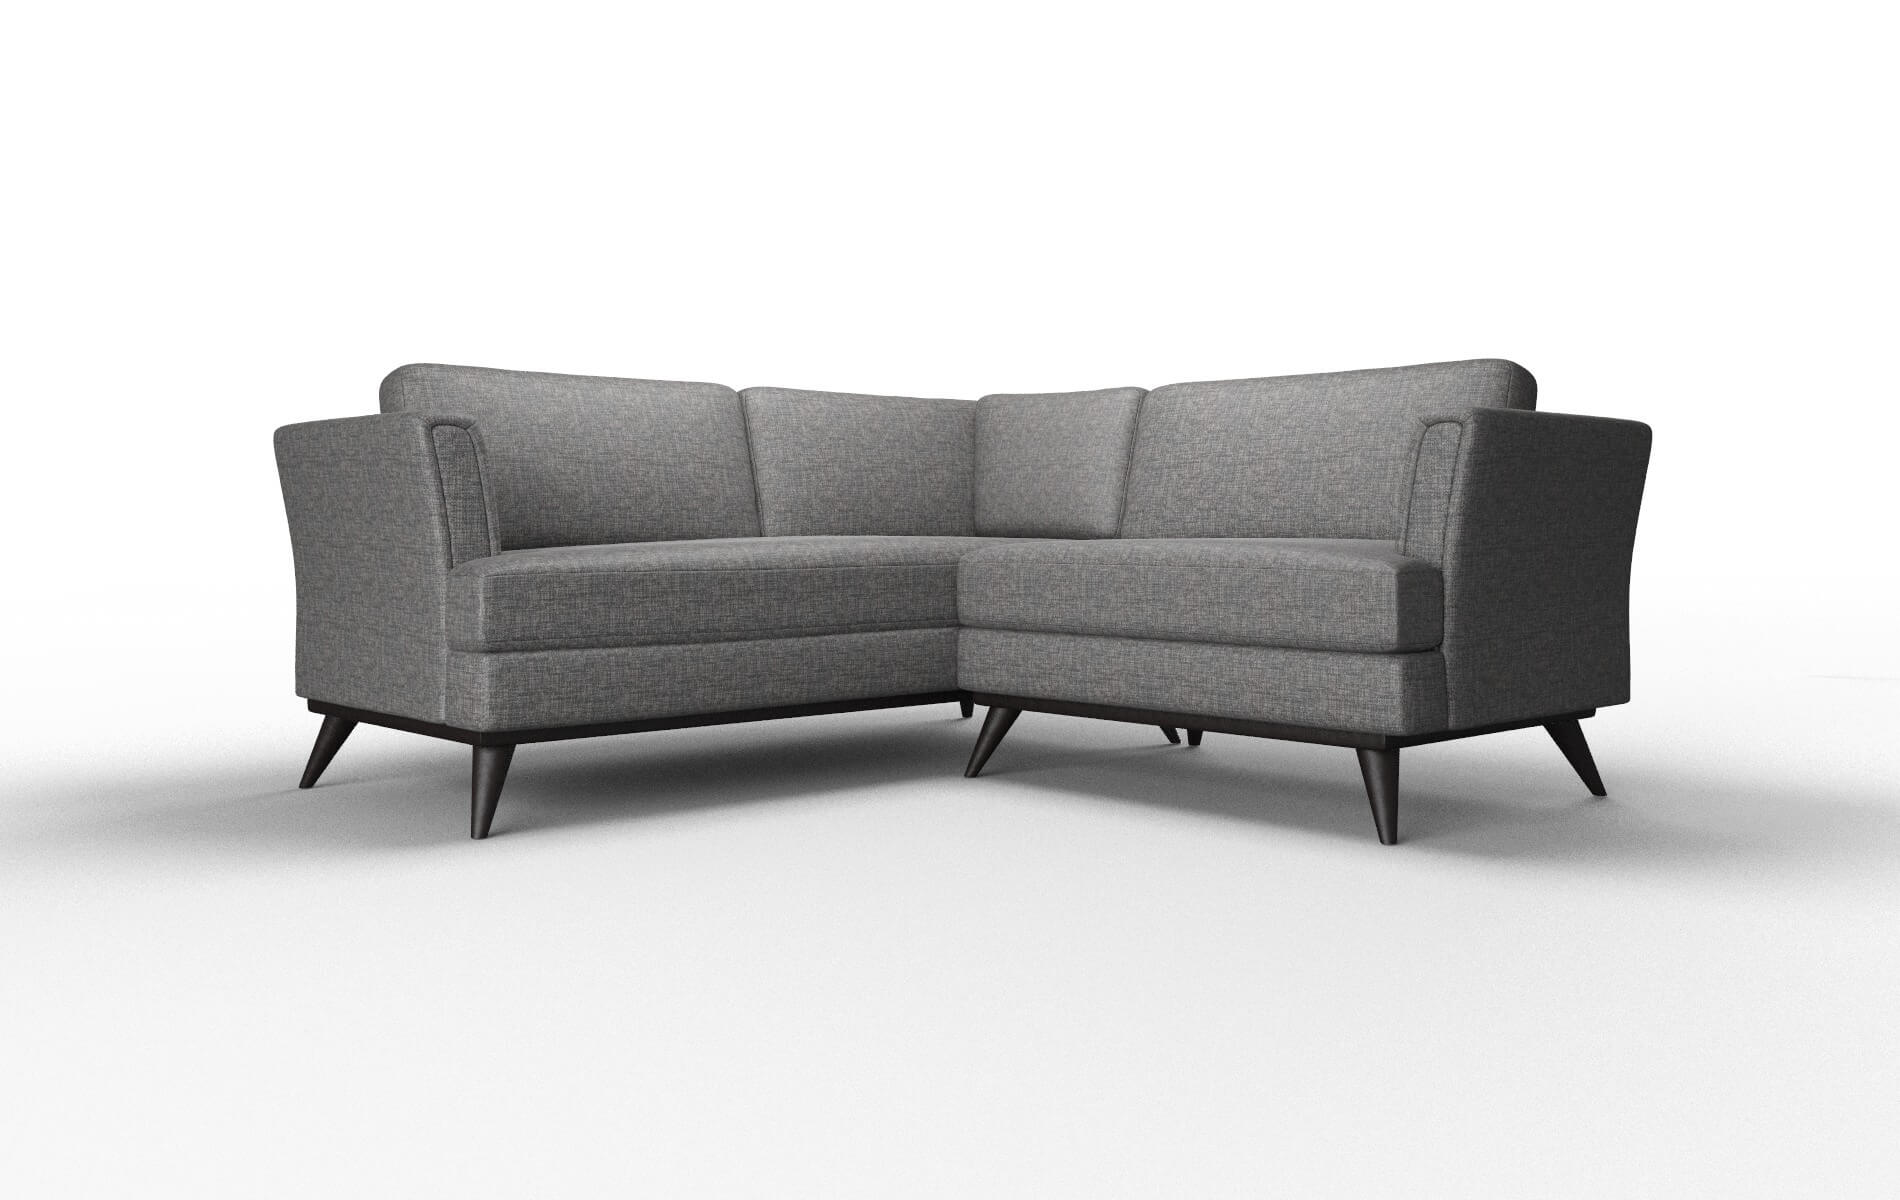 Antalya Insight Charcoal Sectional espresso legs